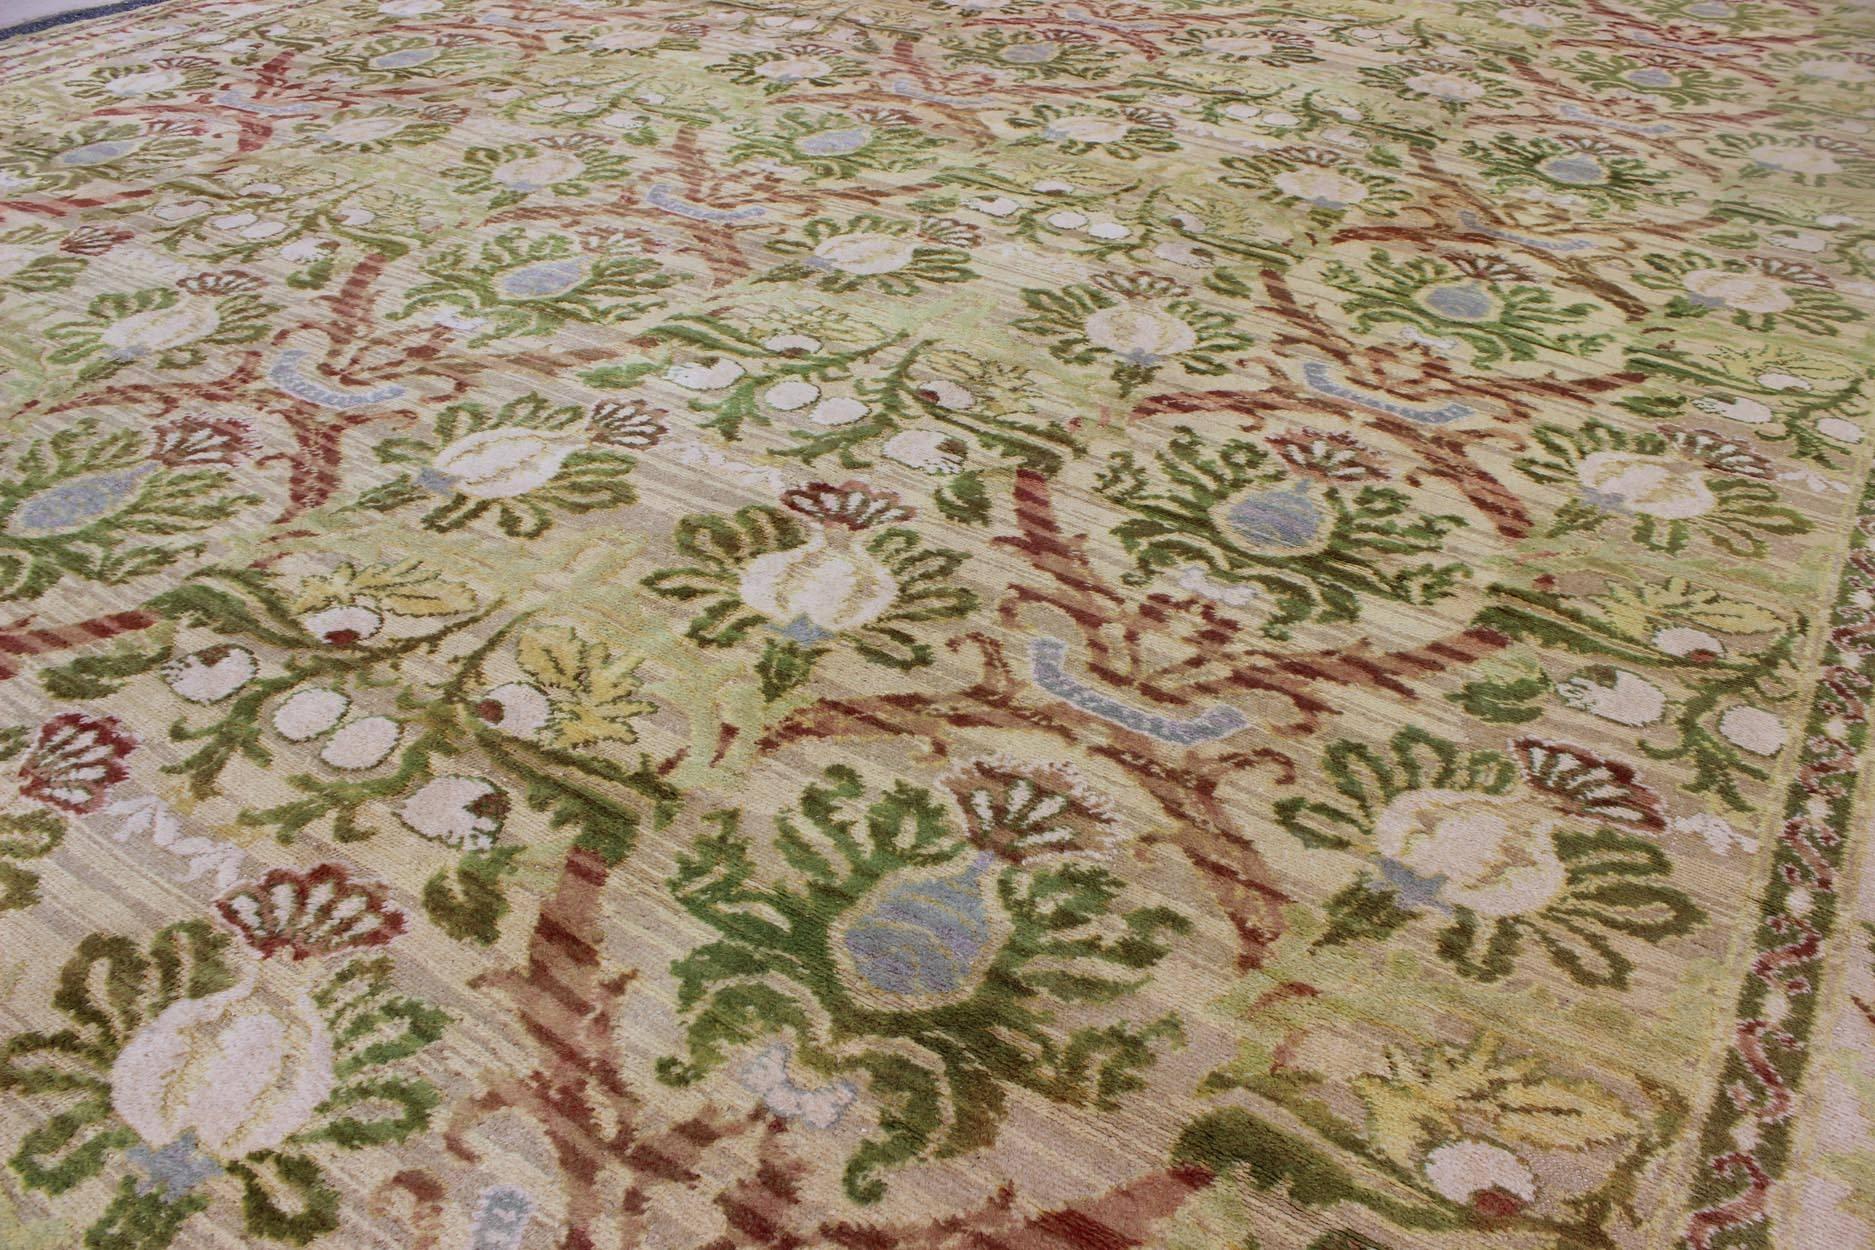 Large Antique Spanish Rug with Circular Medallions in Various Green Tones  In Excellent Condition For Sale In Atlanta, GA